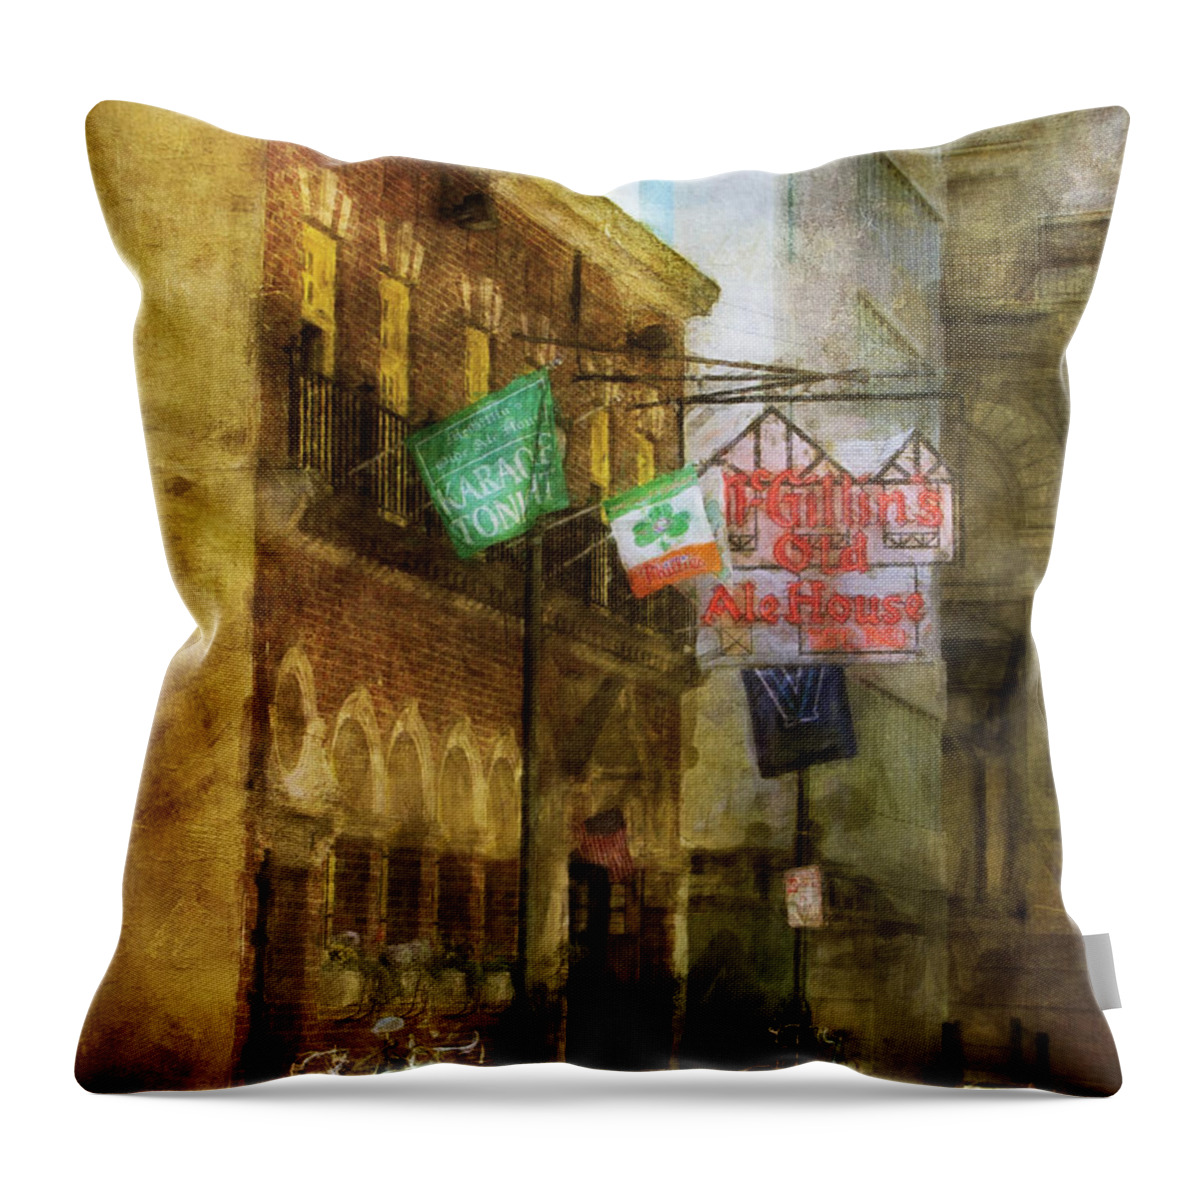 Mcgillins Throw Pillow featuring the photograph McGillins Olde Ale House by John Rivera